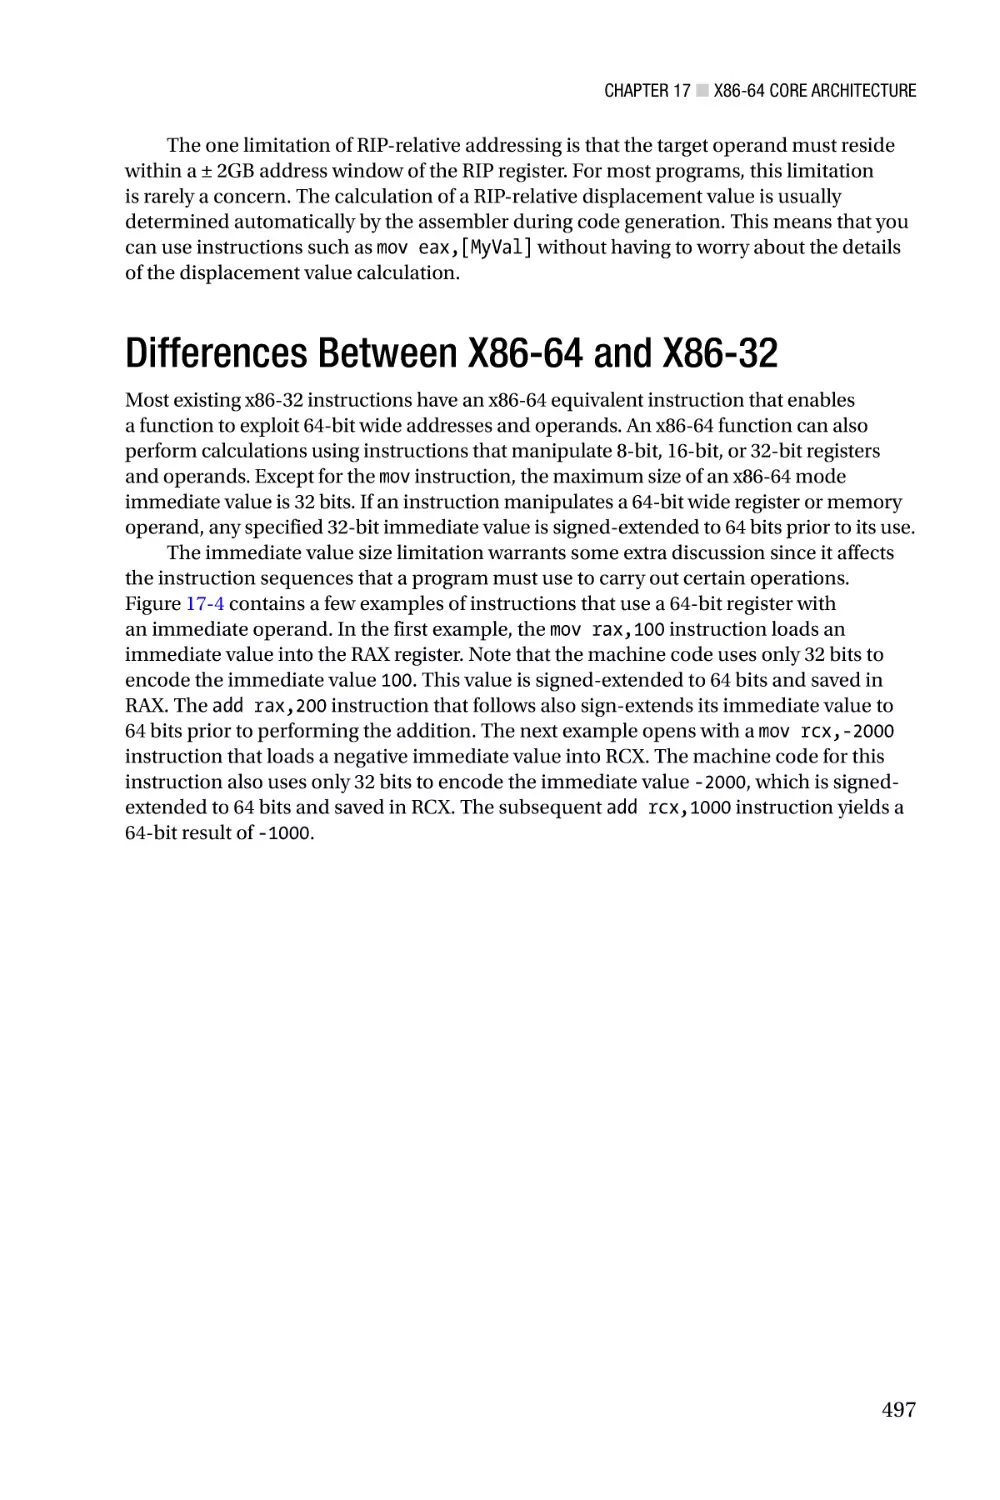 Differences Between X86-64 and X86-32